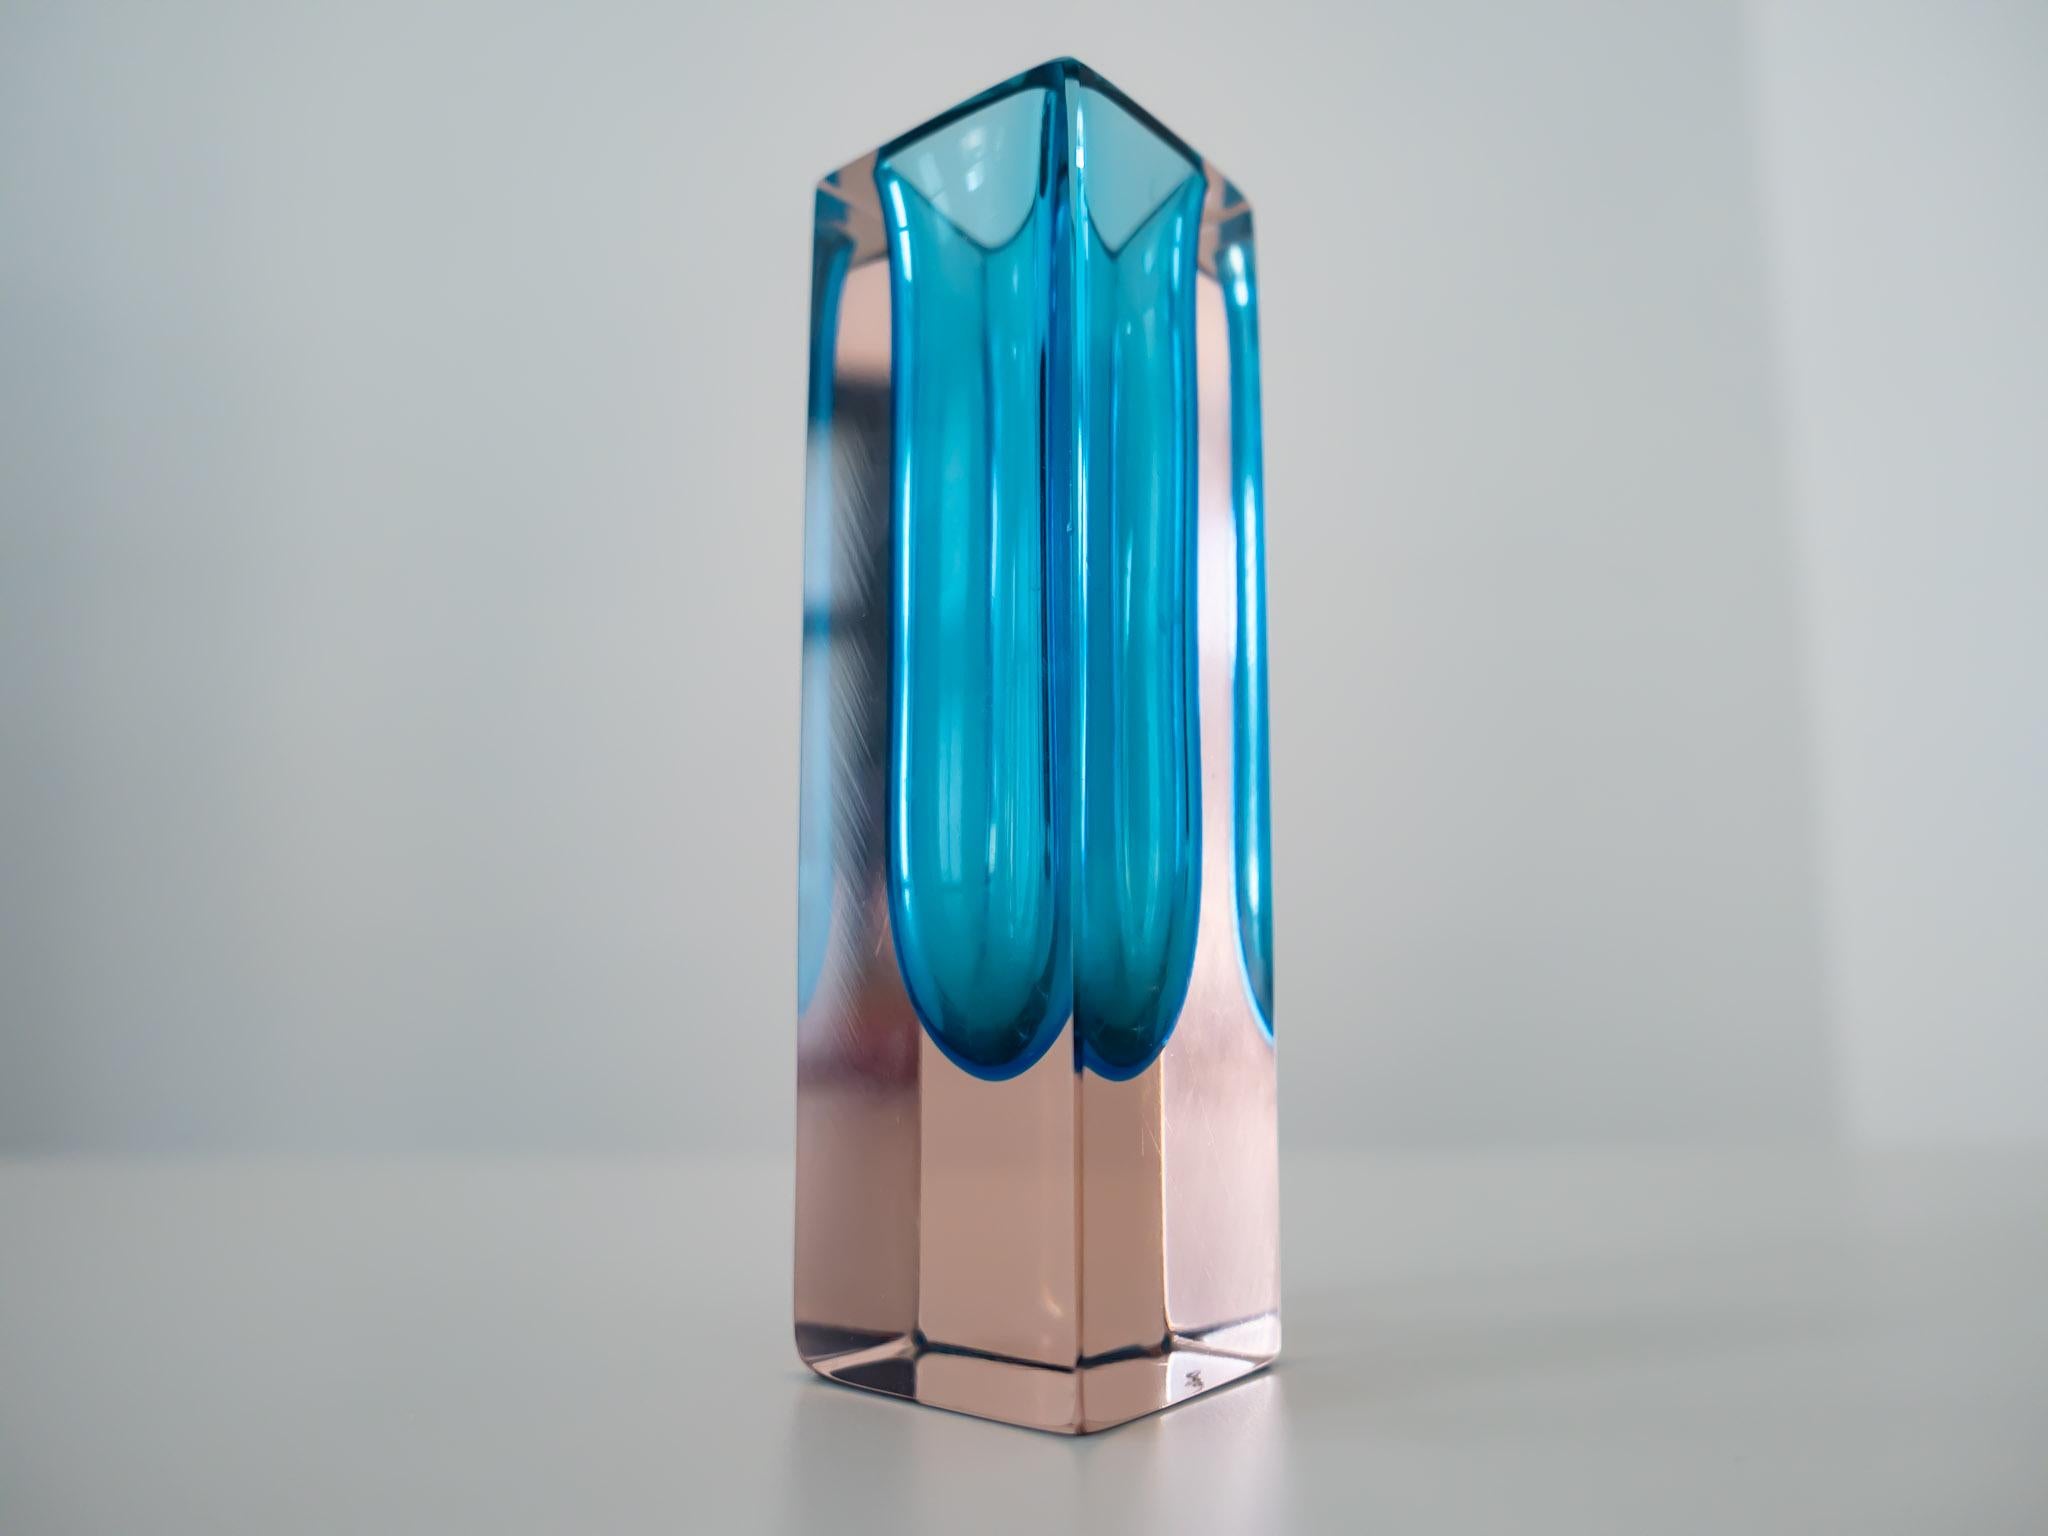 Turquoise bright pink Murano Sommerso glass vase by Flavio Poli, Italy 1960s.

This ashtonishing turquoise and bright pink Murano Glass vase by the Italian Designer Flavio Poli is the absolute eyecatcher for any modern home. In the years between